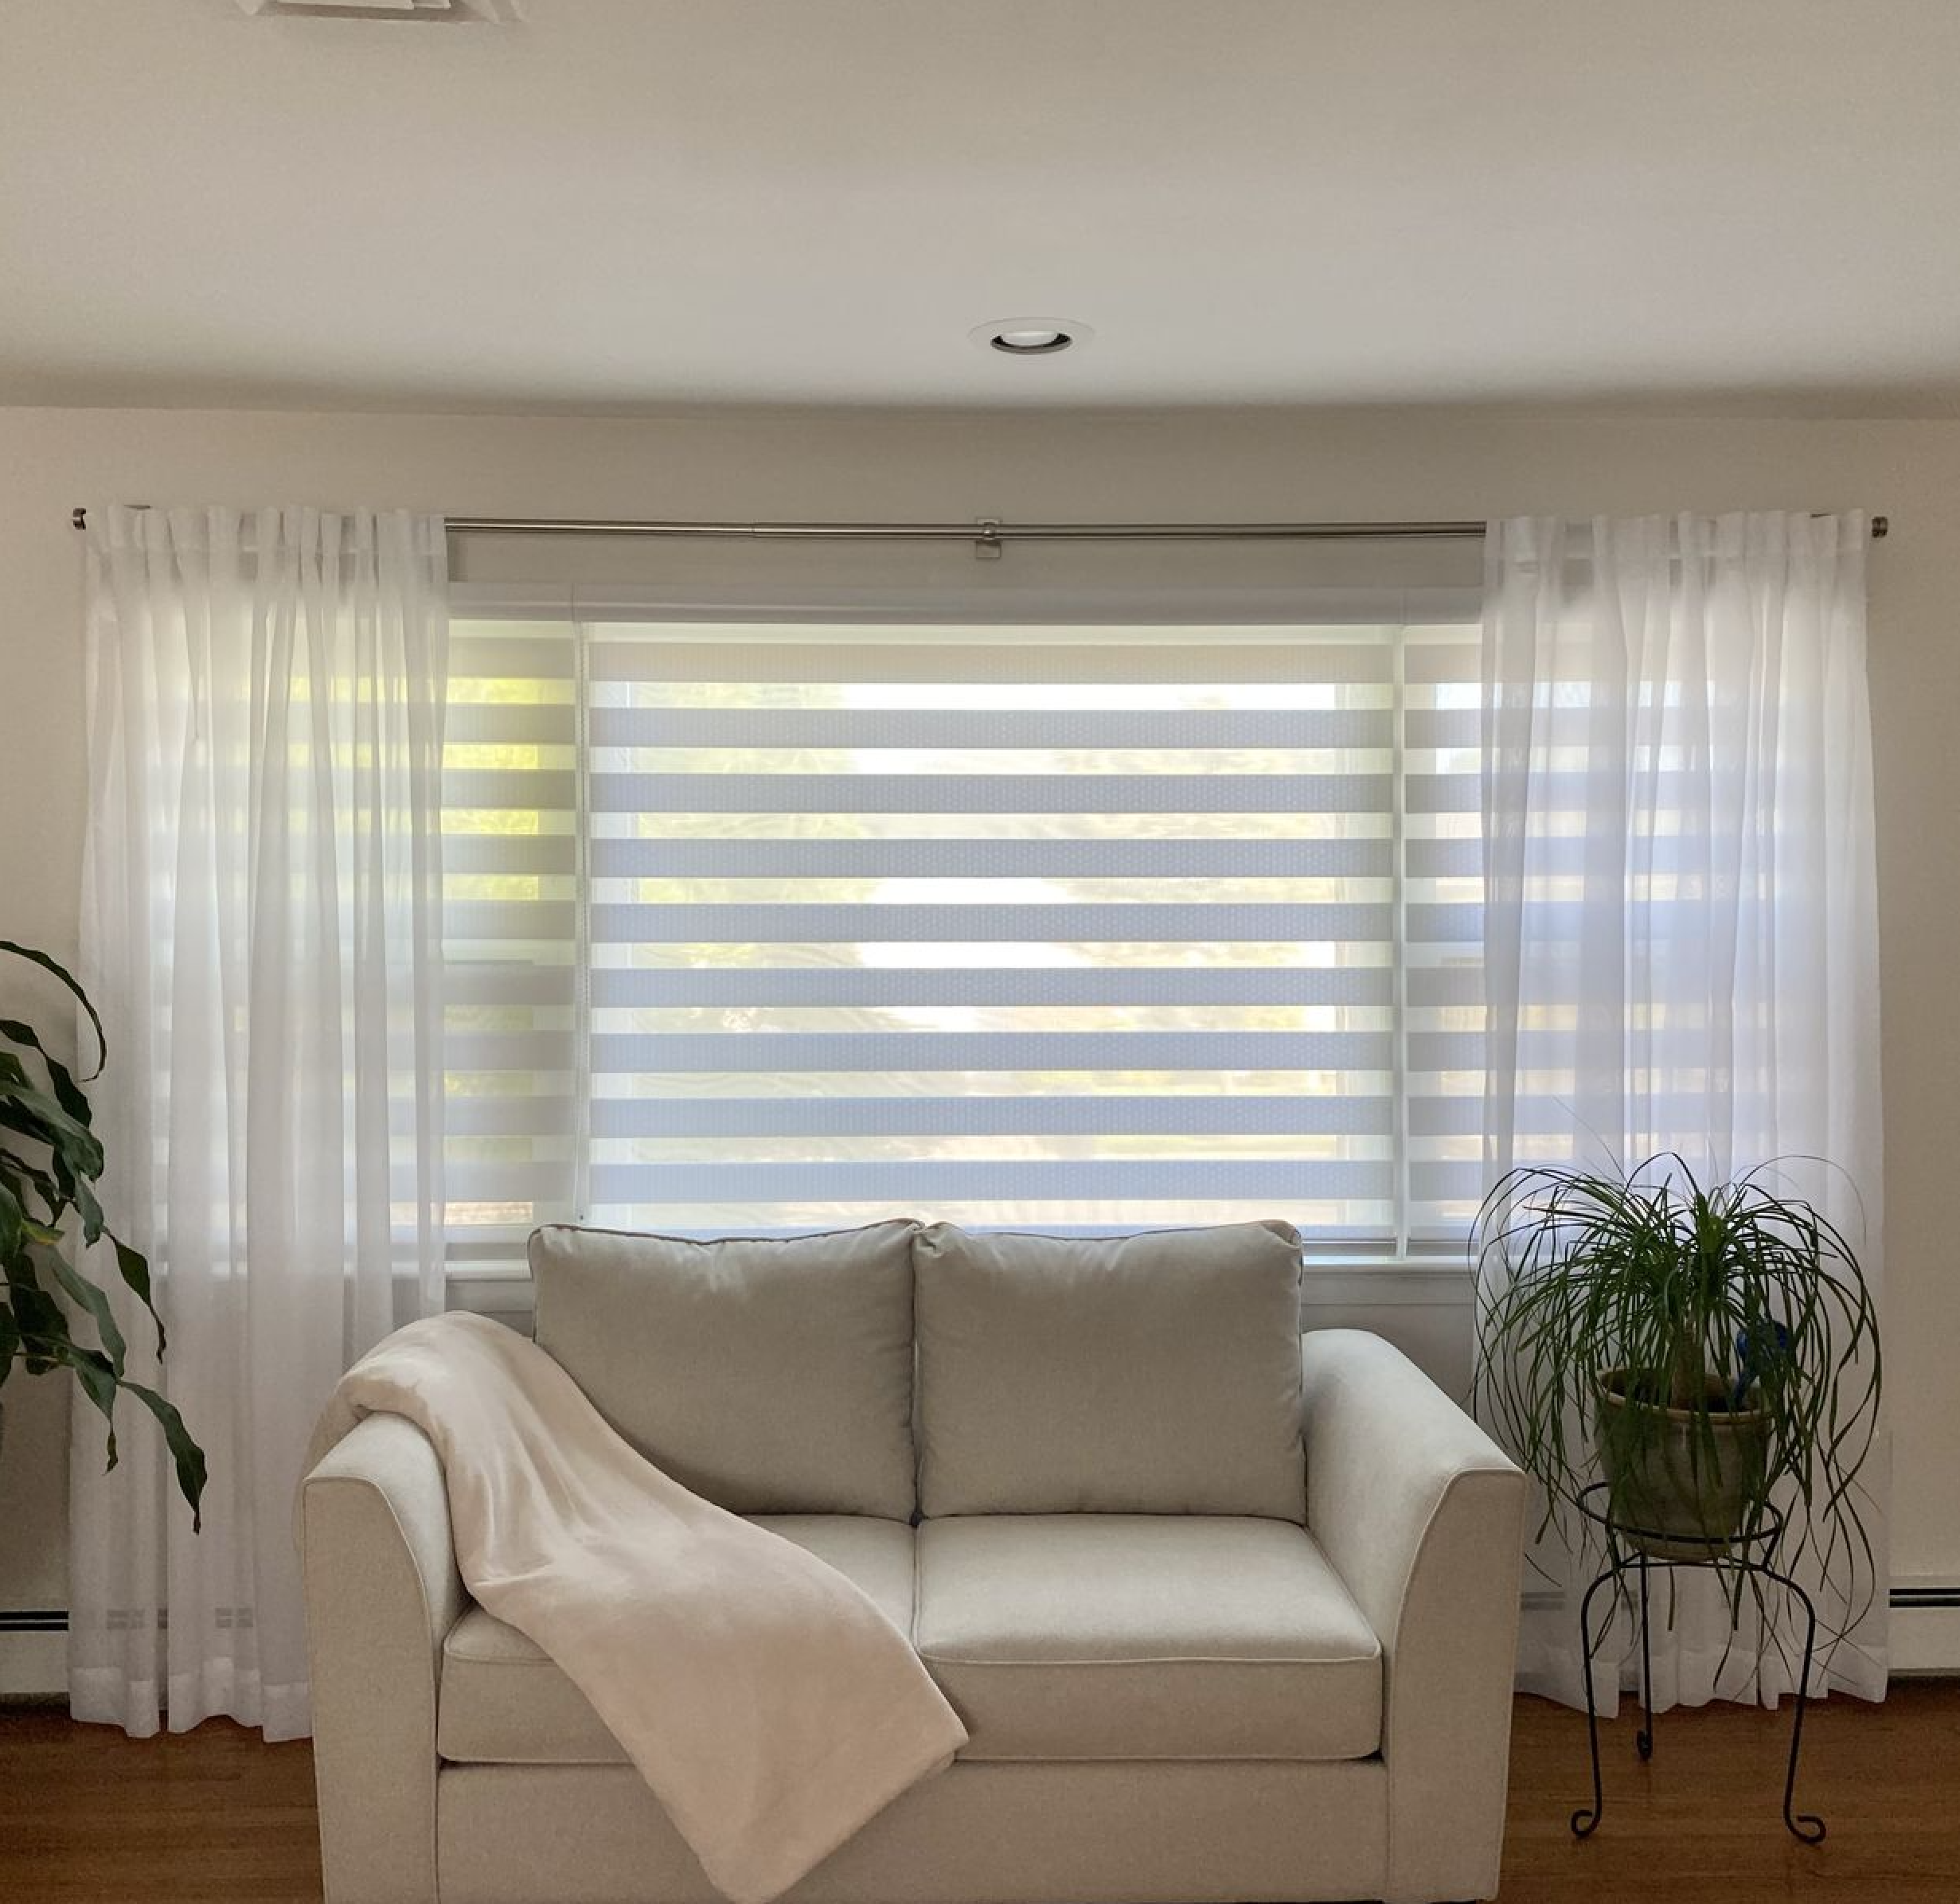 Cascade sheer shades paired with airy sheer curtains